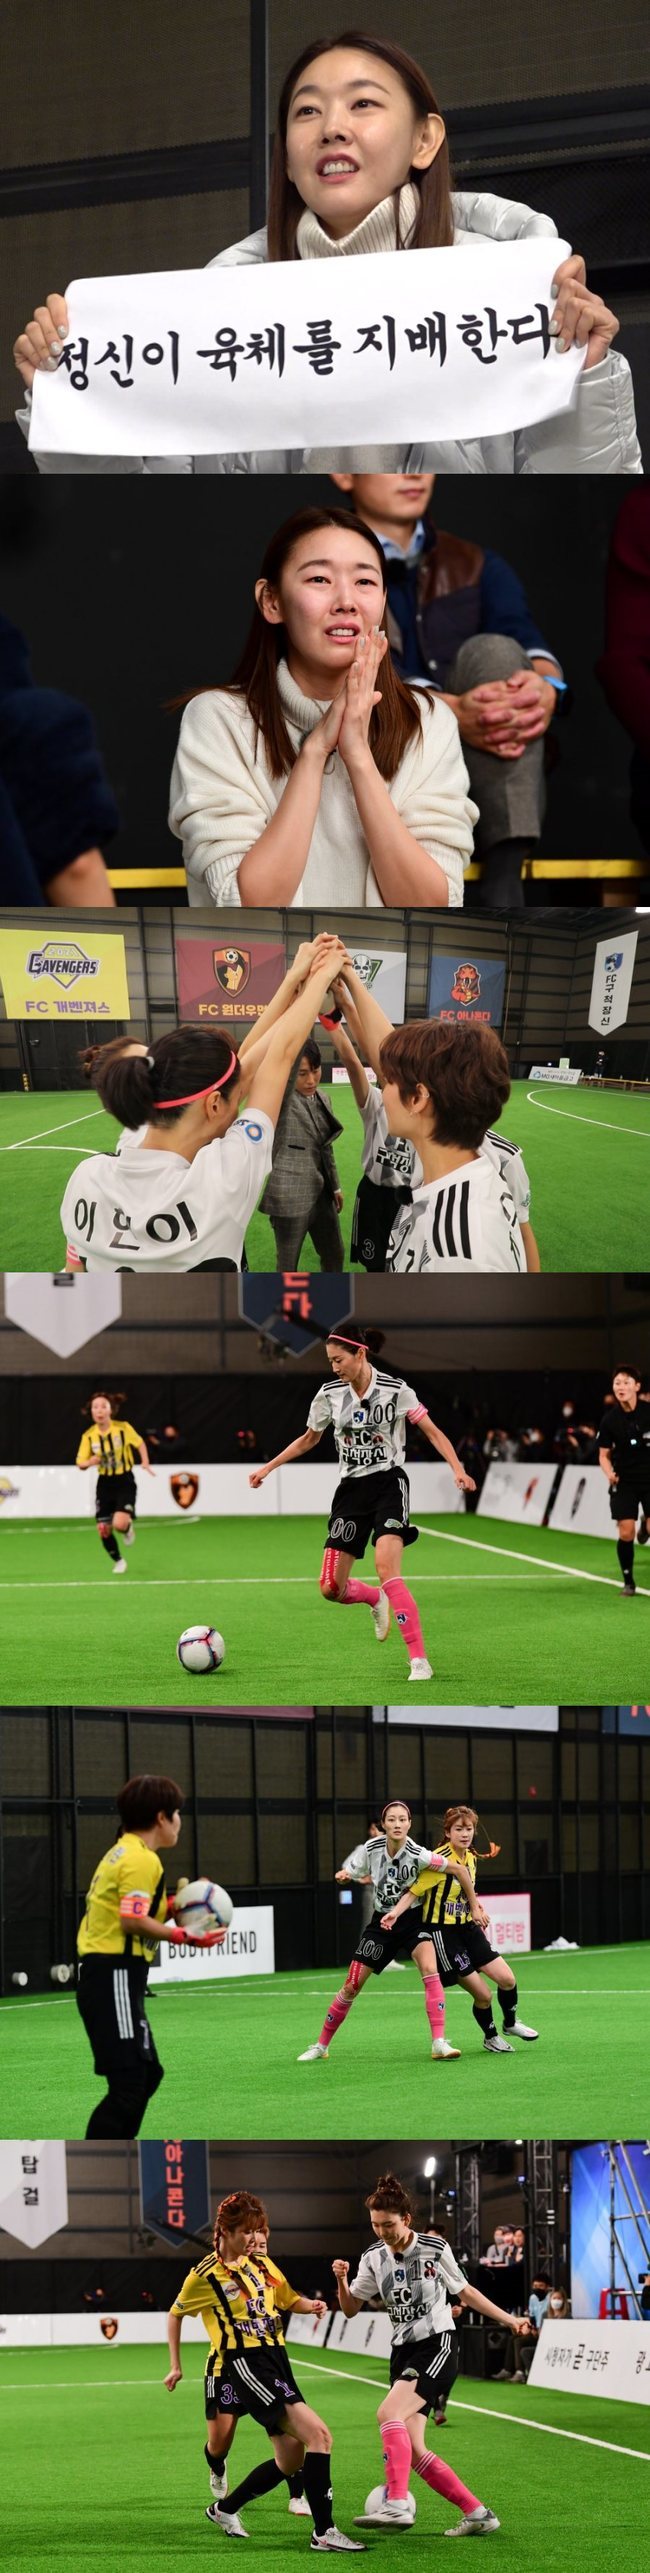 Han Hye-jin pours tearsIn SBS football entertainment Goal Hitting, which will be broadcast on February 2, the big match between FC Gucheok Jangsin and FC Gavengers will be held.The Kyonggi is currently attracting attention as a match between the first and second teams in the UEFA Champions League.Currently, both teams earn two wins and are ranked in the top with multiple points, so they are expecting to play.In particular, a visit by former captain Han Hye-jin is expected to attract attention to support FC Gucheok Jangsin.FC Gucheok Jangsin is the top scorer in the UEFA Champions League with 10 goals in the past two Kyonggi.Han Hye-jin was the support shooter to continue this momentum. She was the spiritual landlord of the team at the time of season 1, and she appeared with a coffee car and made a surprise appearance.